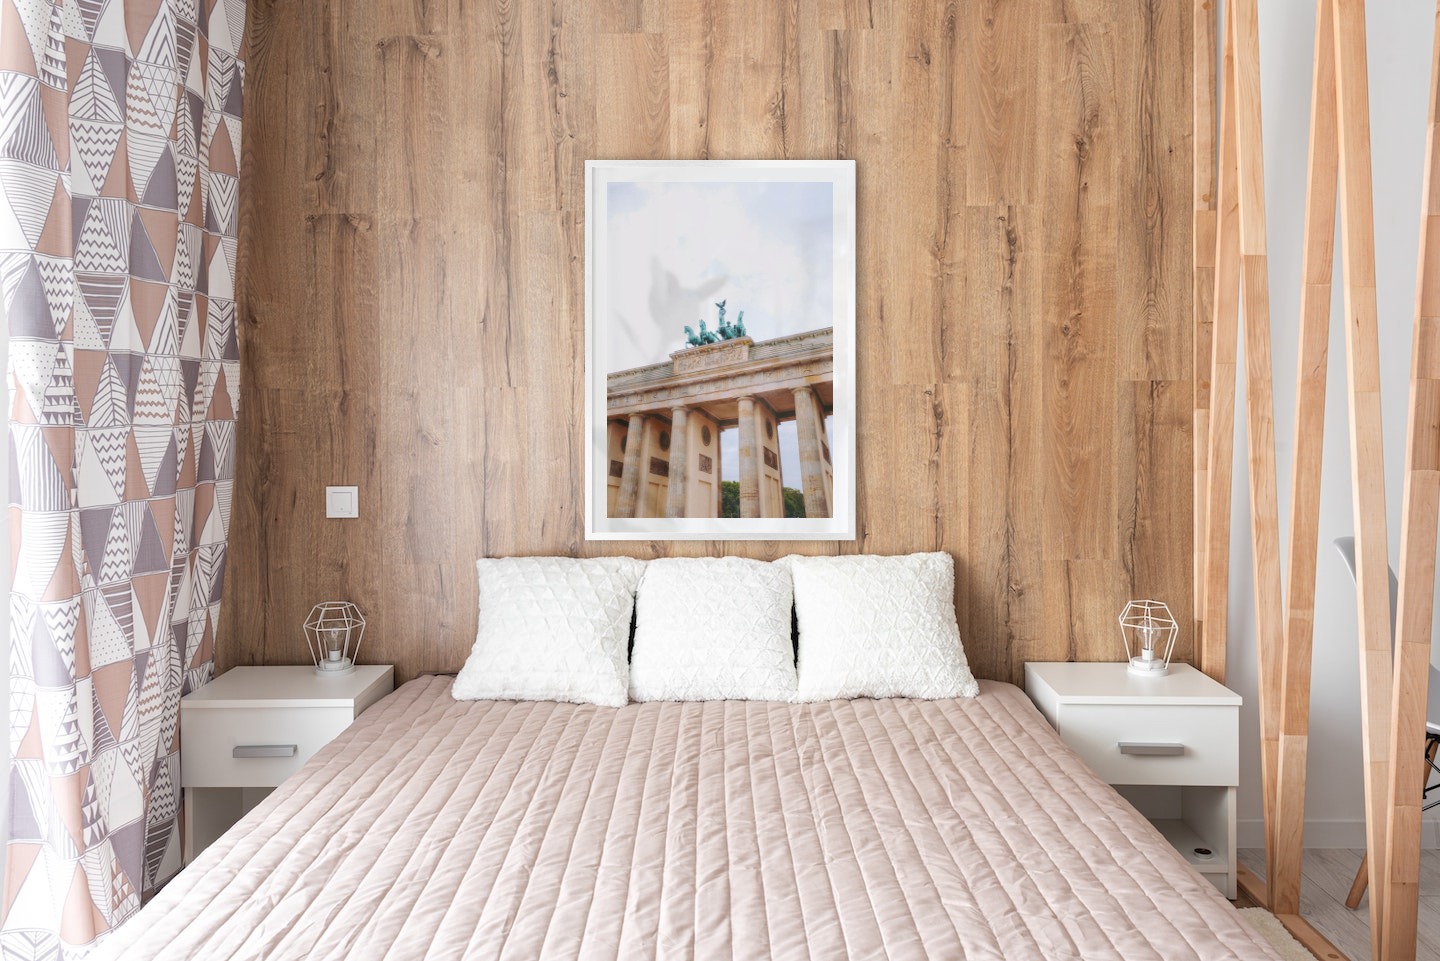 Gallery wall with picture frame in silver in size 70x100 with print "Berlin"